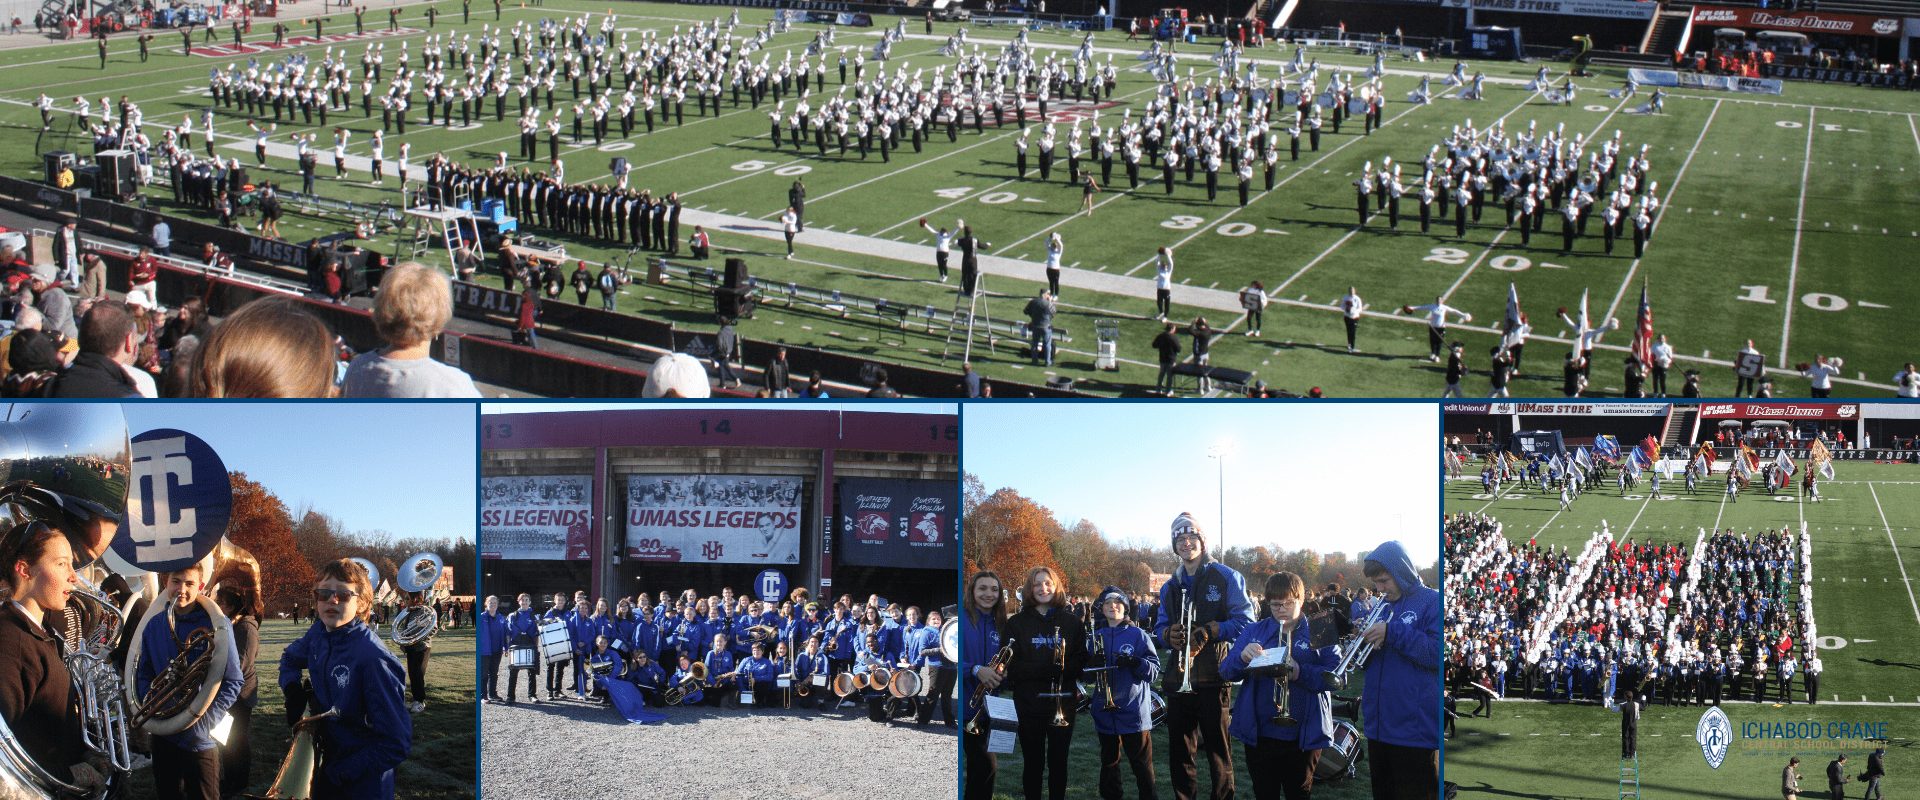 PICTURES Marching Band at UMass Band Day Ichabod Crane Central